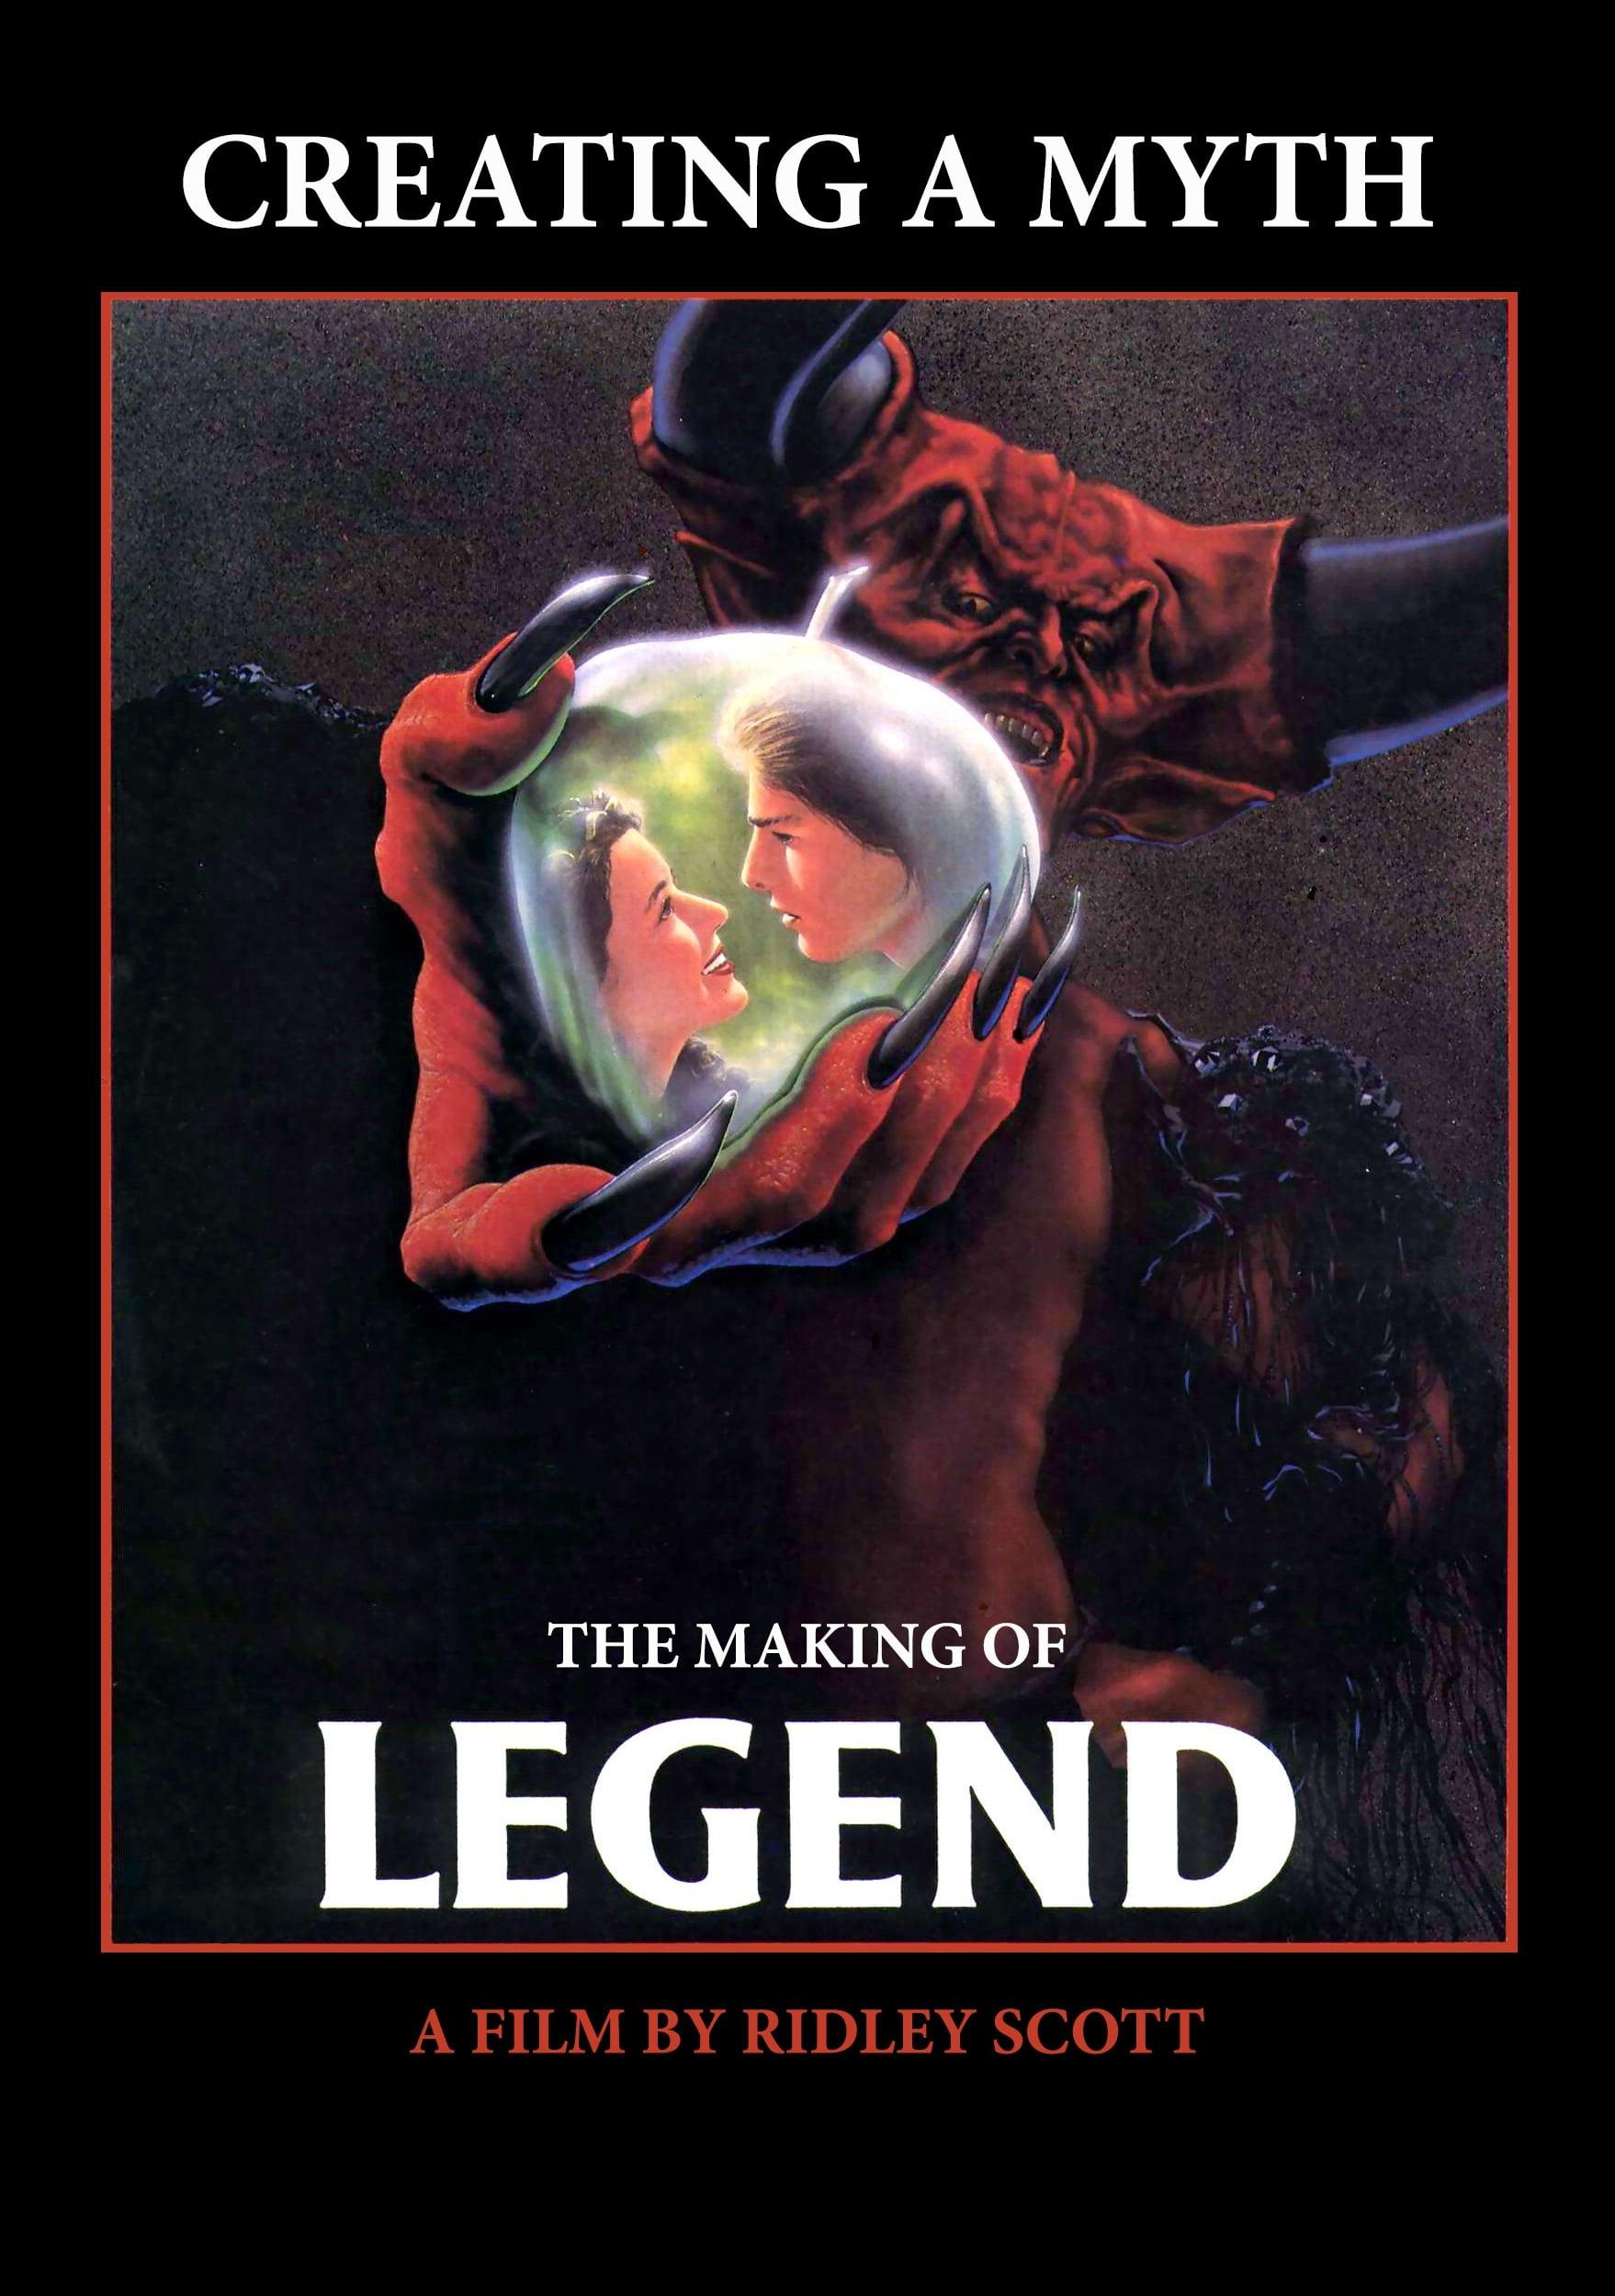 Creating a Myth... the Memories of 'Legend' poster